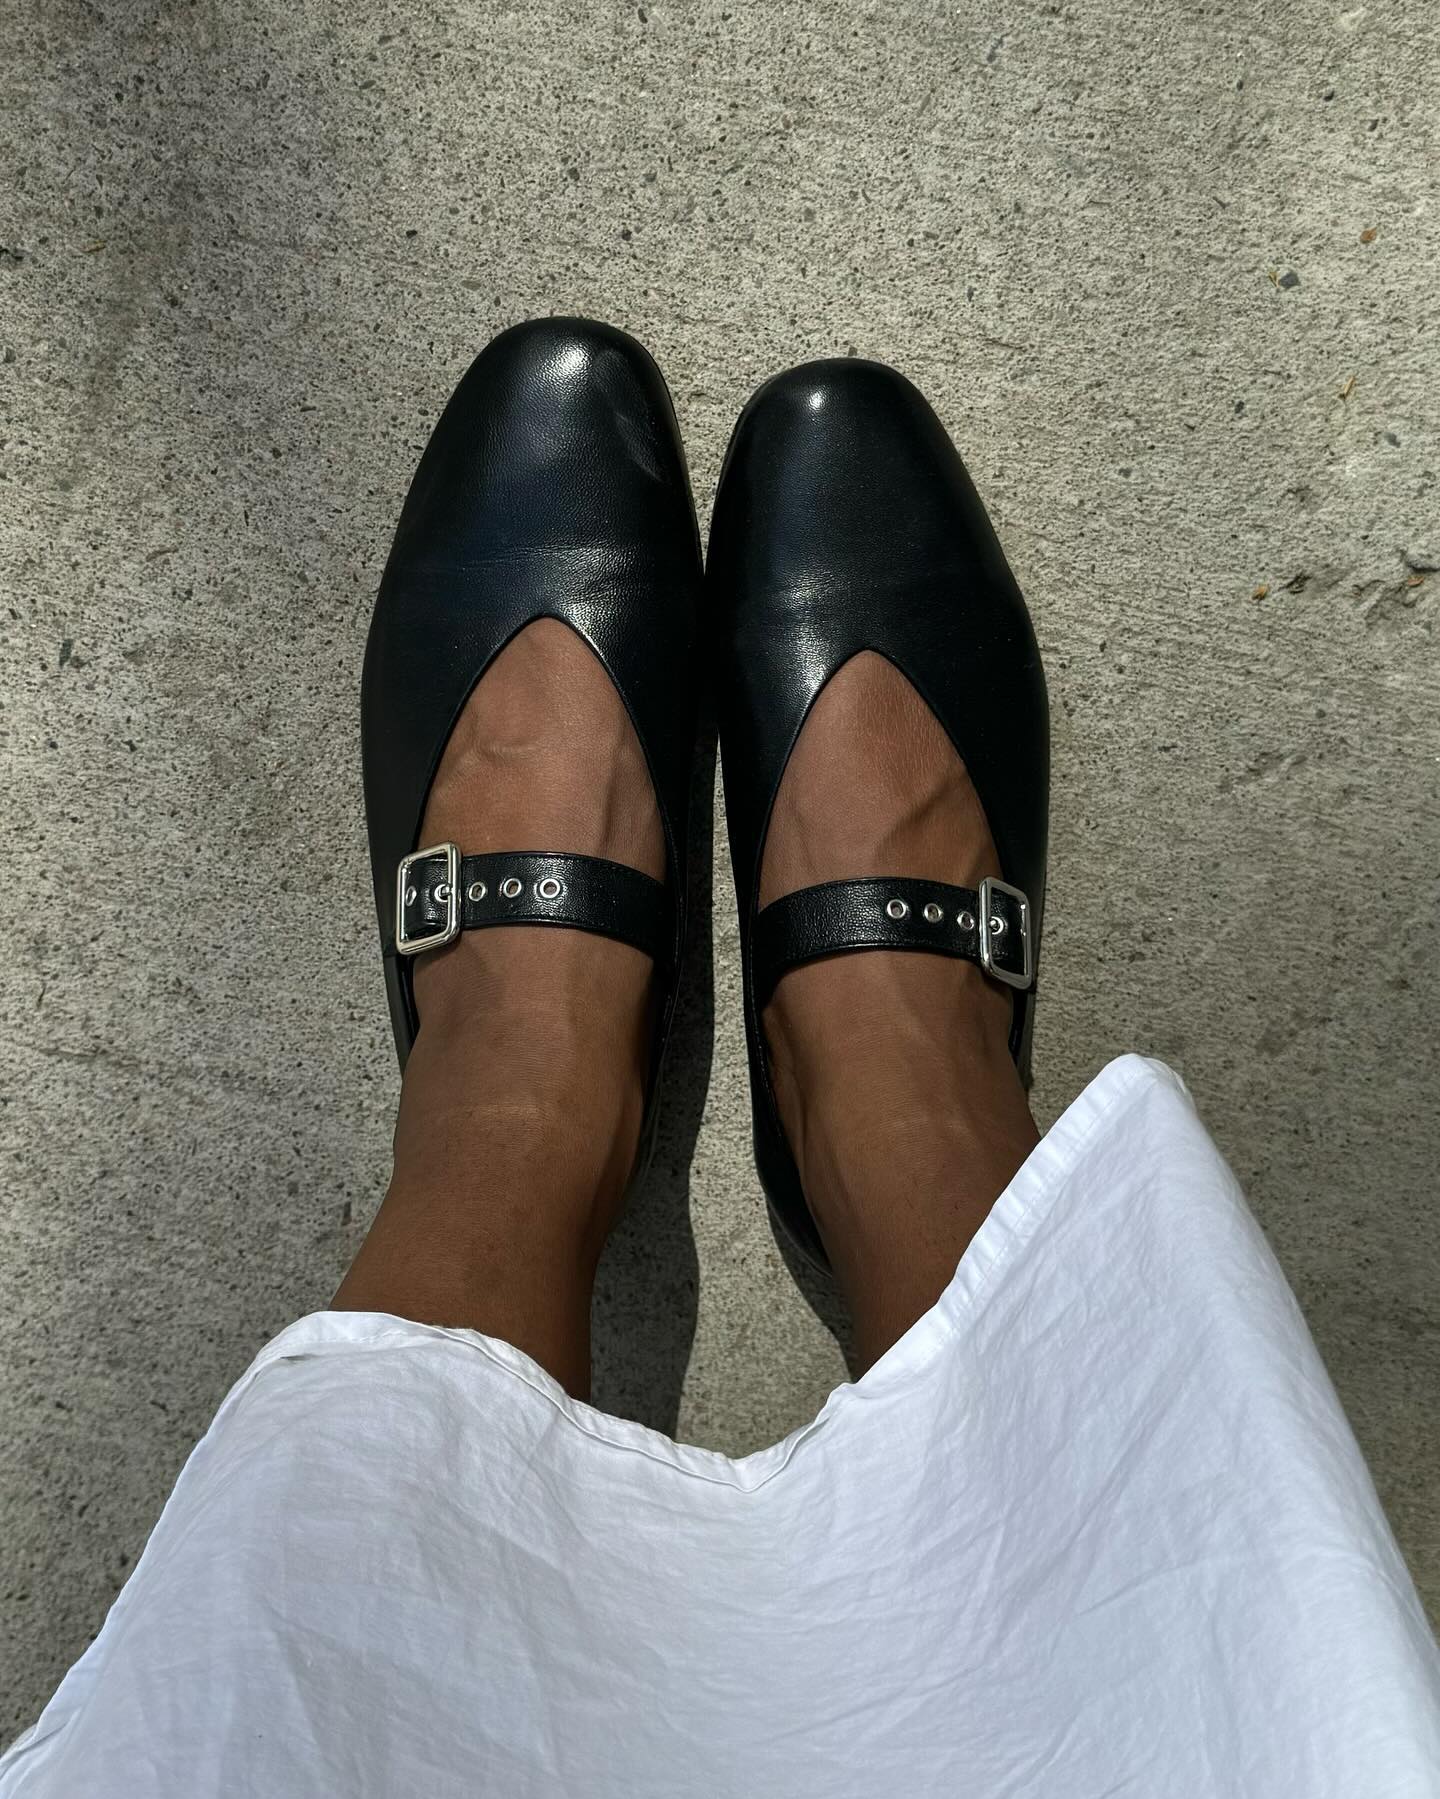 Image of COS buckled ballet flats